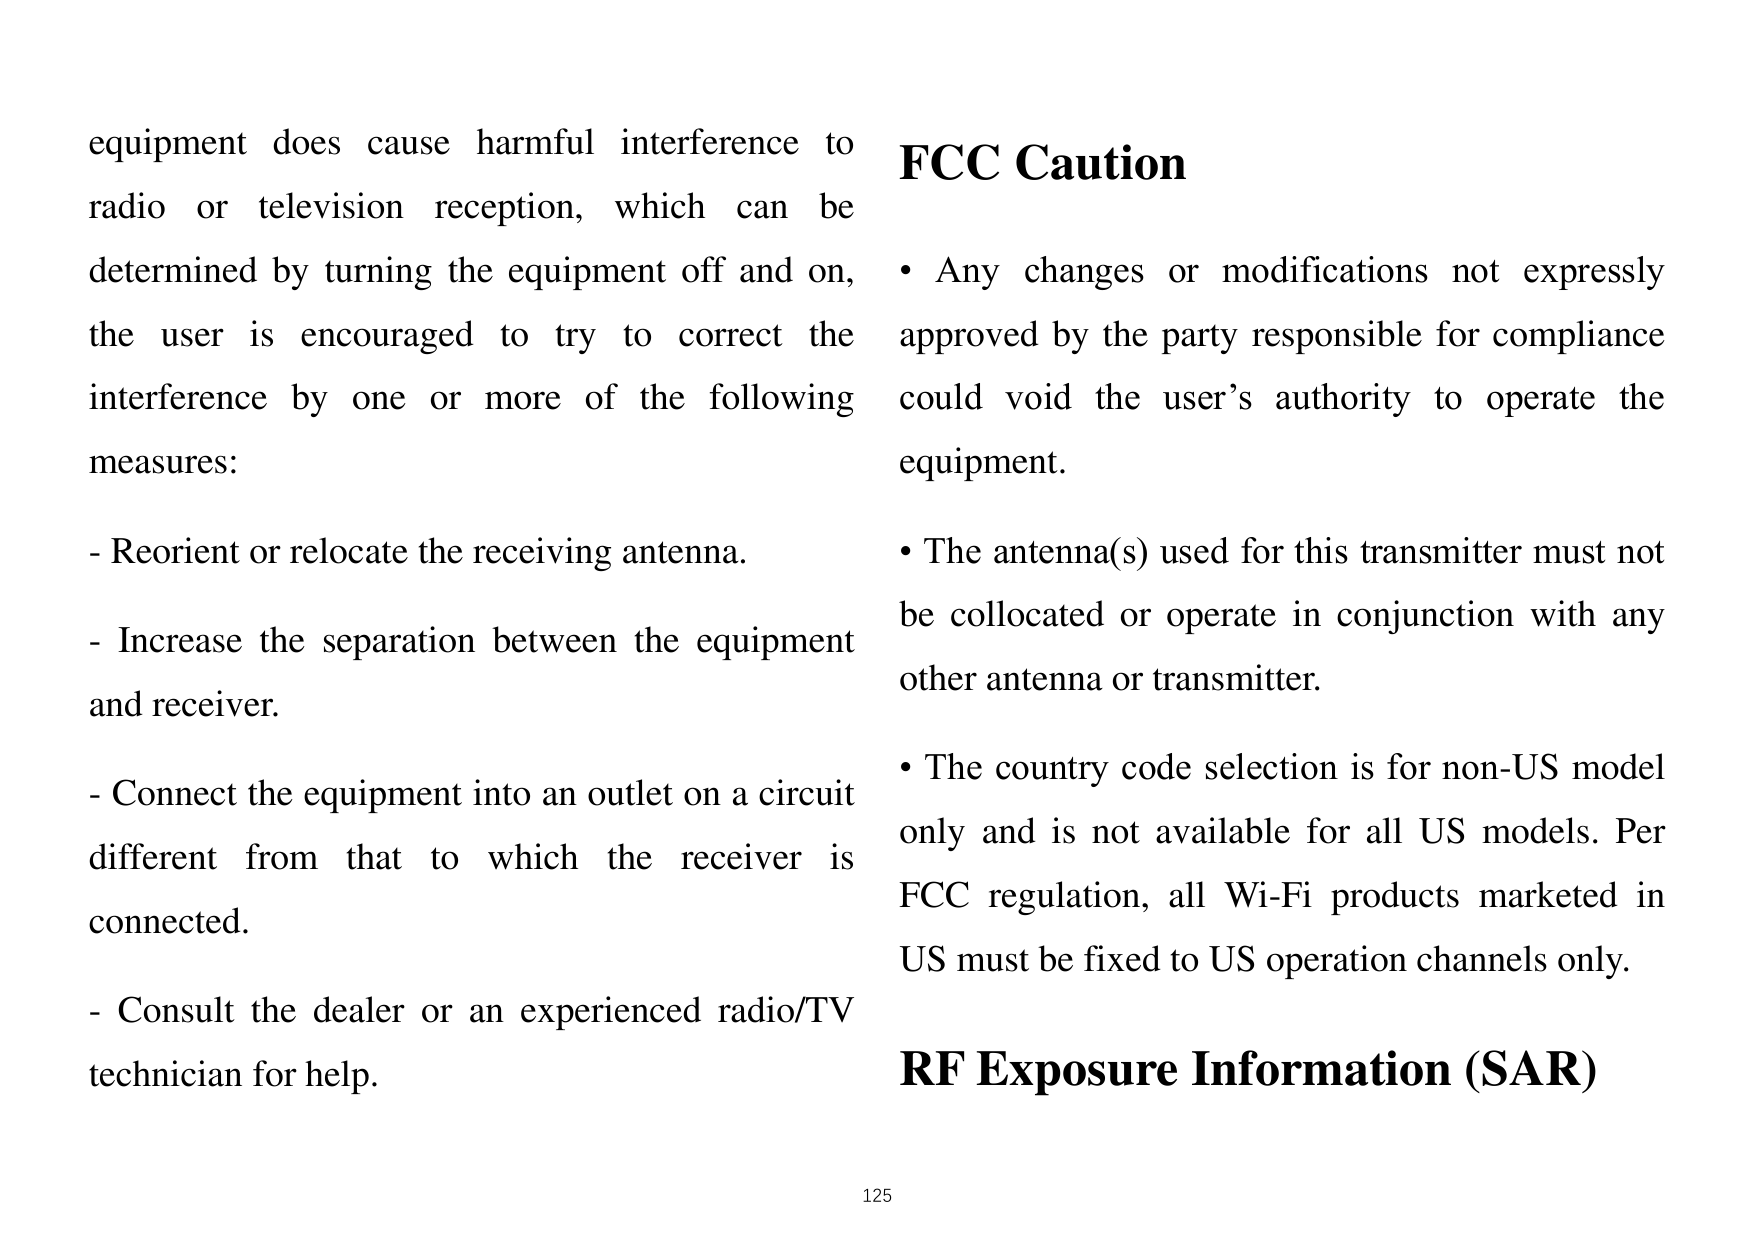 equipment does cause harmful interference toFCC Cautionradio or television reception, which can bedetermined by turning the equi